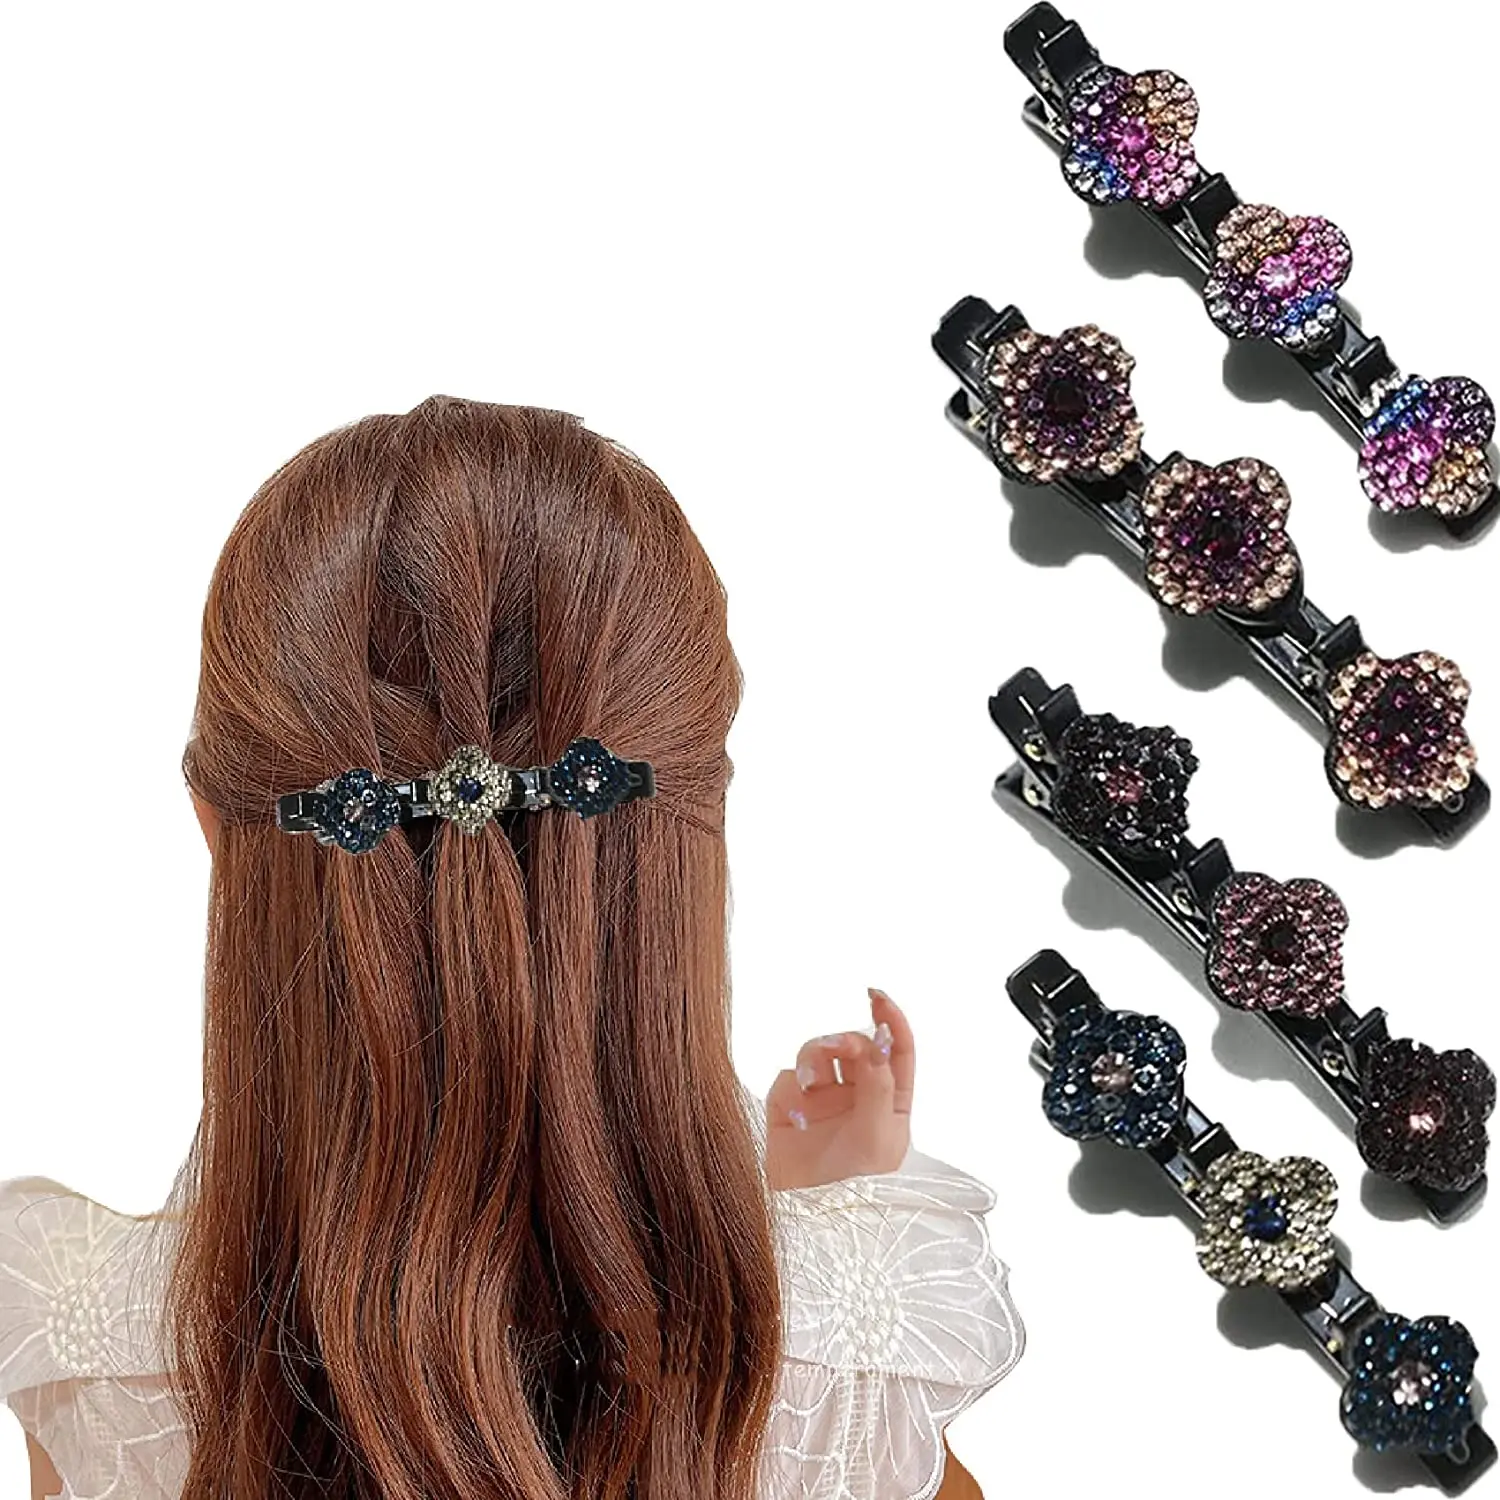 Sparkling Crystal Stone Braided Hair Clips, Satin Fabric Hair Bands, Rhinestone Hair Clips, Braided Hair Clip with Rhinestones raizi 2 pcs stone seam setter for joining leveling granite countertop seamless installation tools with 6 inch vacuum suction cup